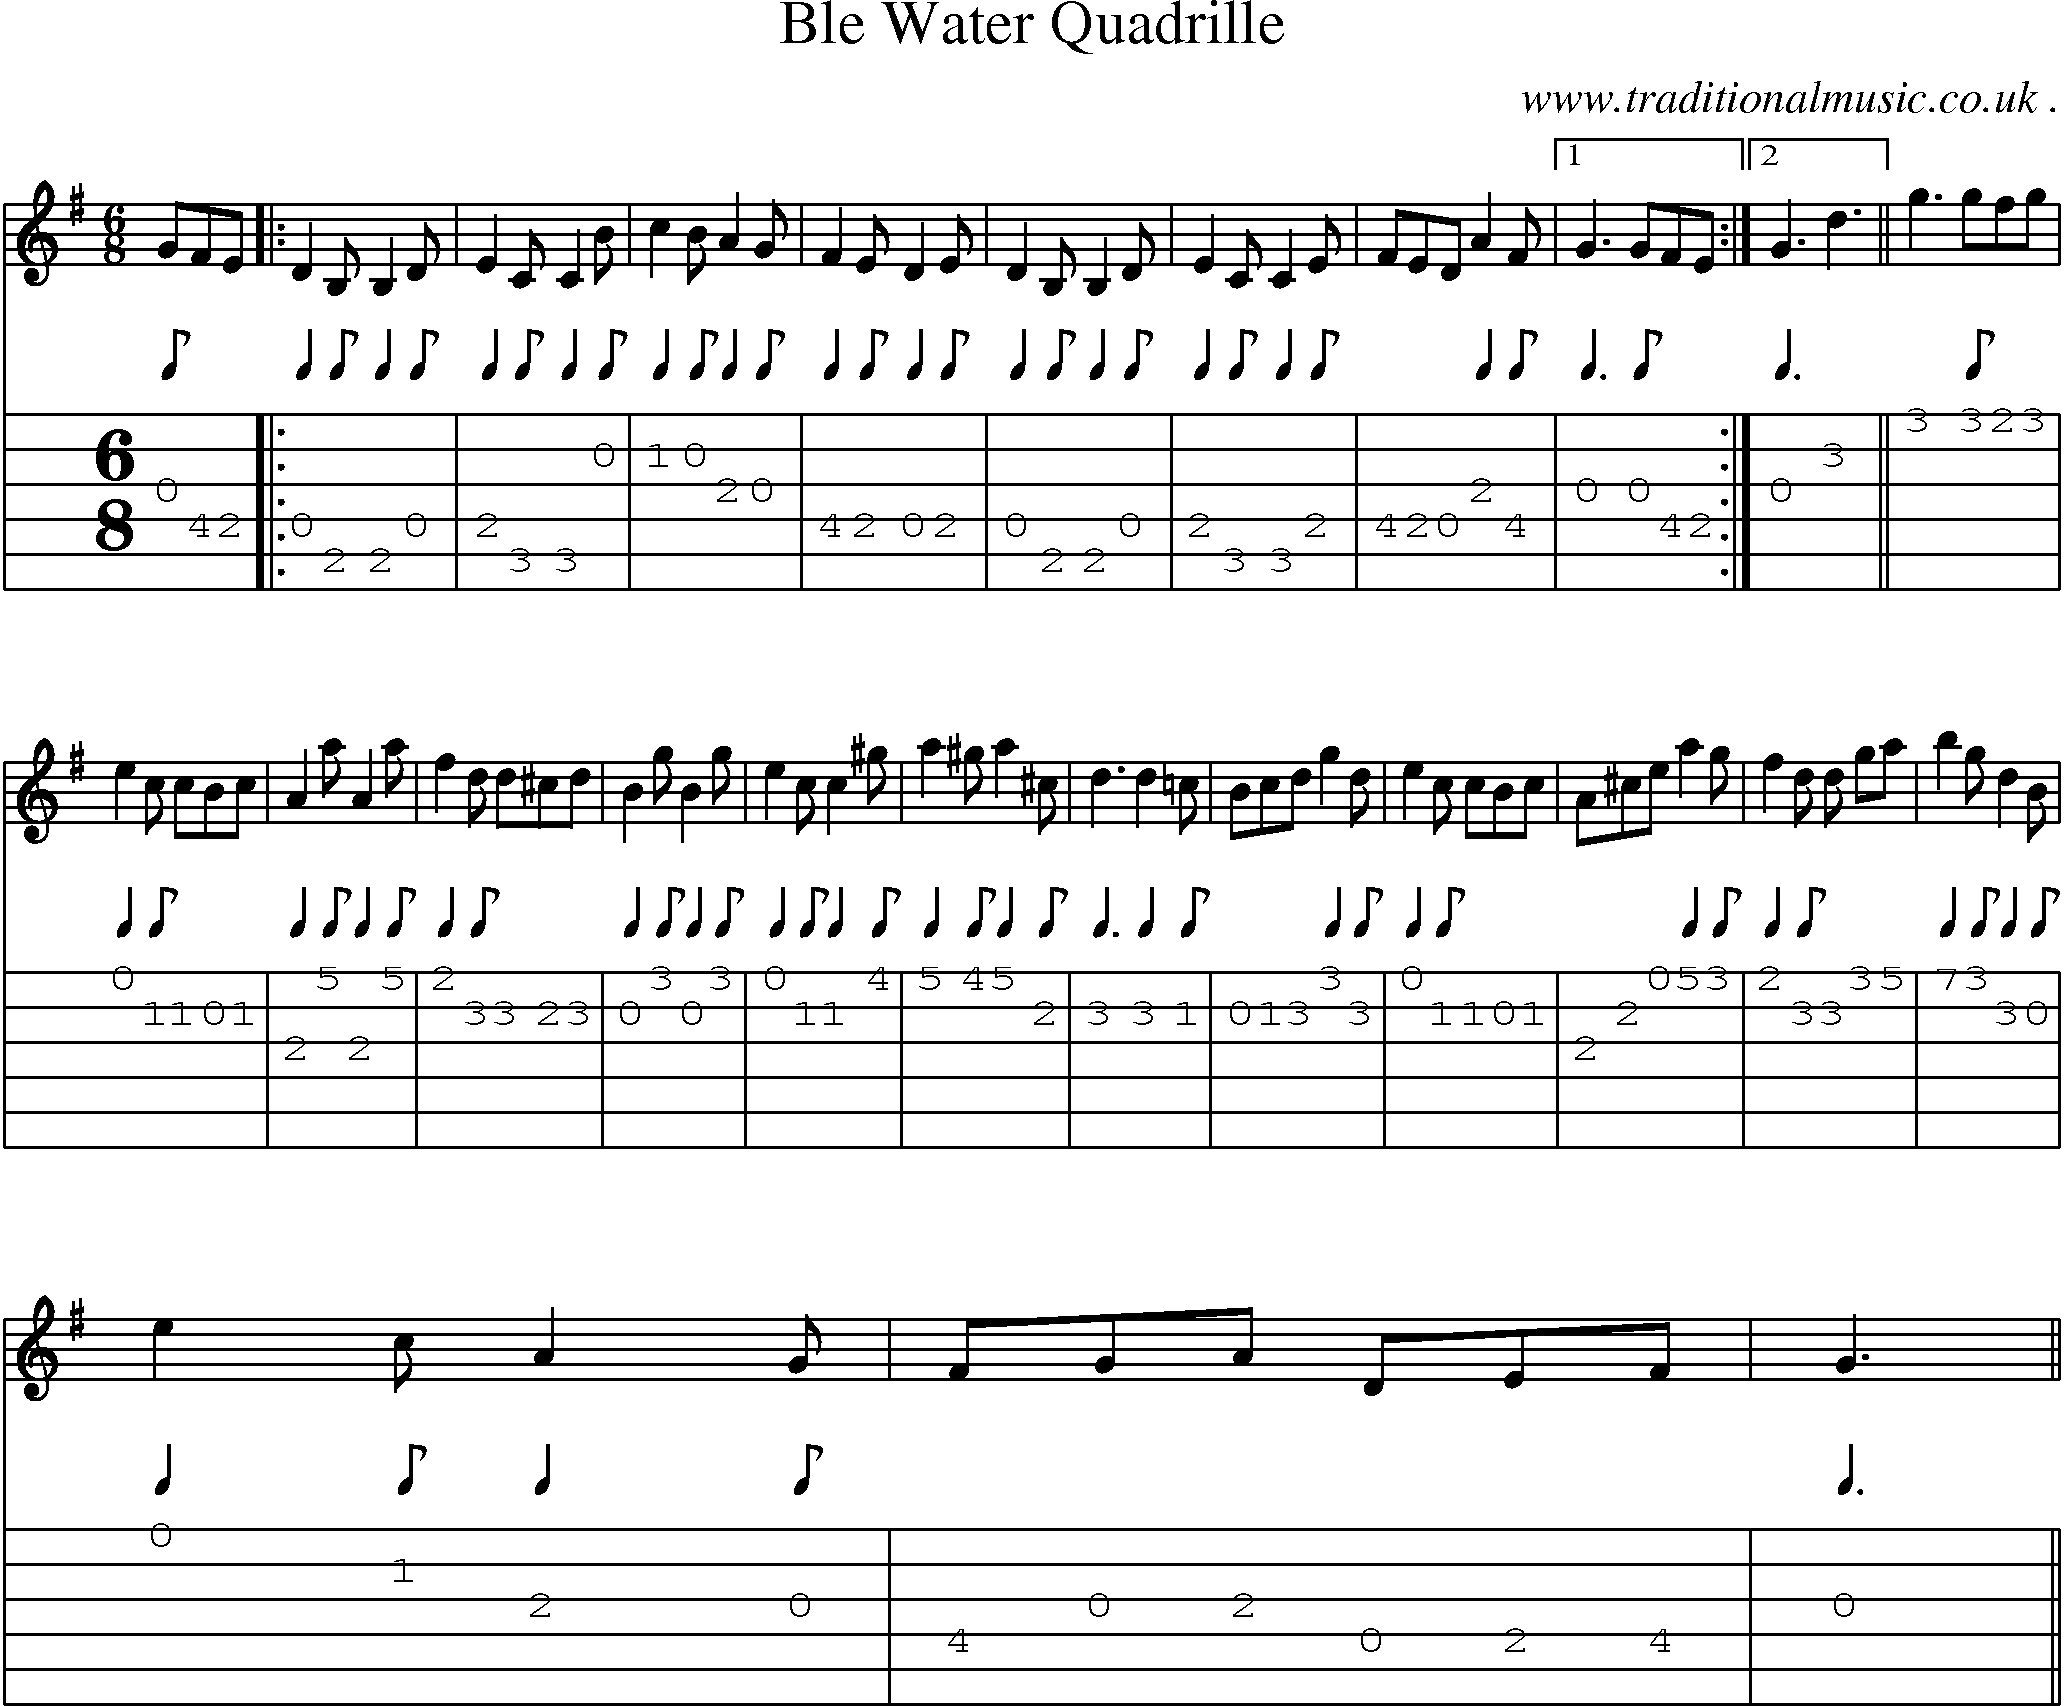 Sheet-Music and Guitar Tabs for Ble Water Quadrille